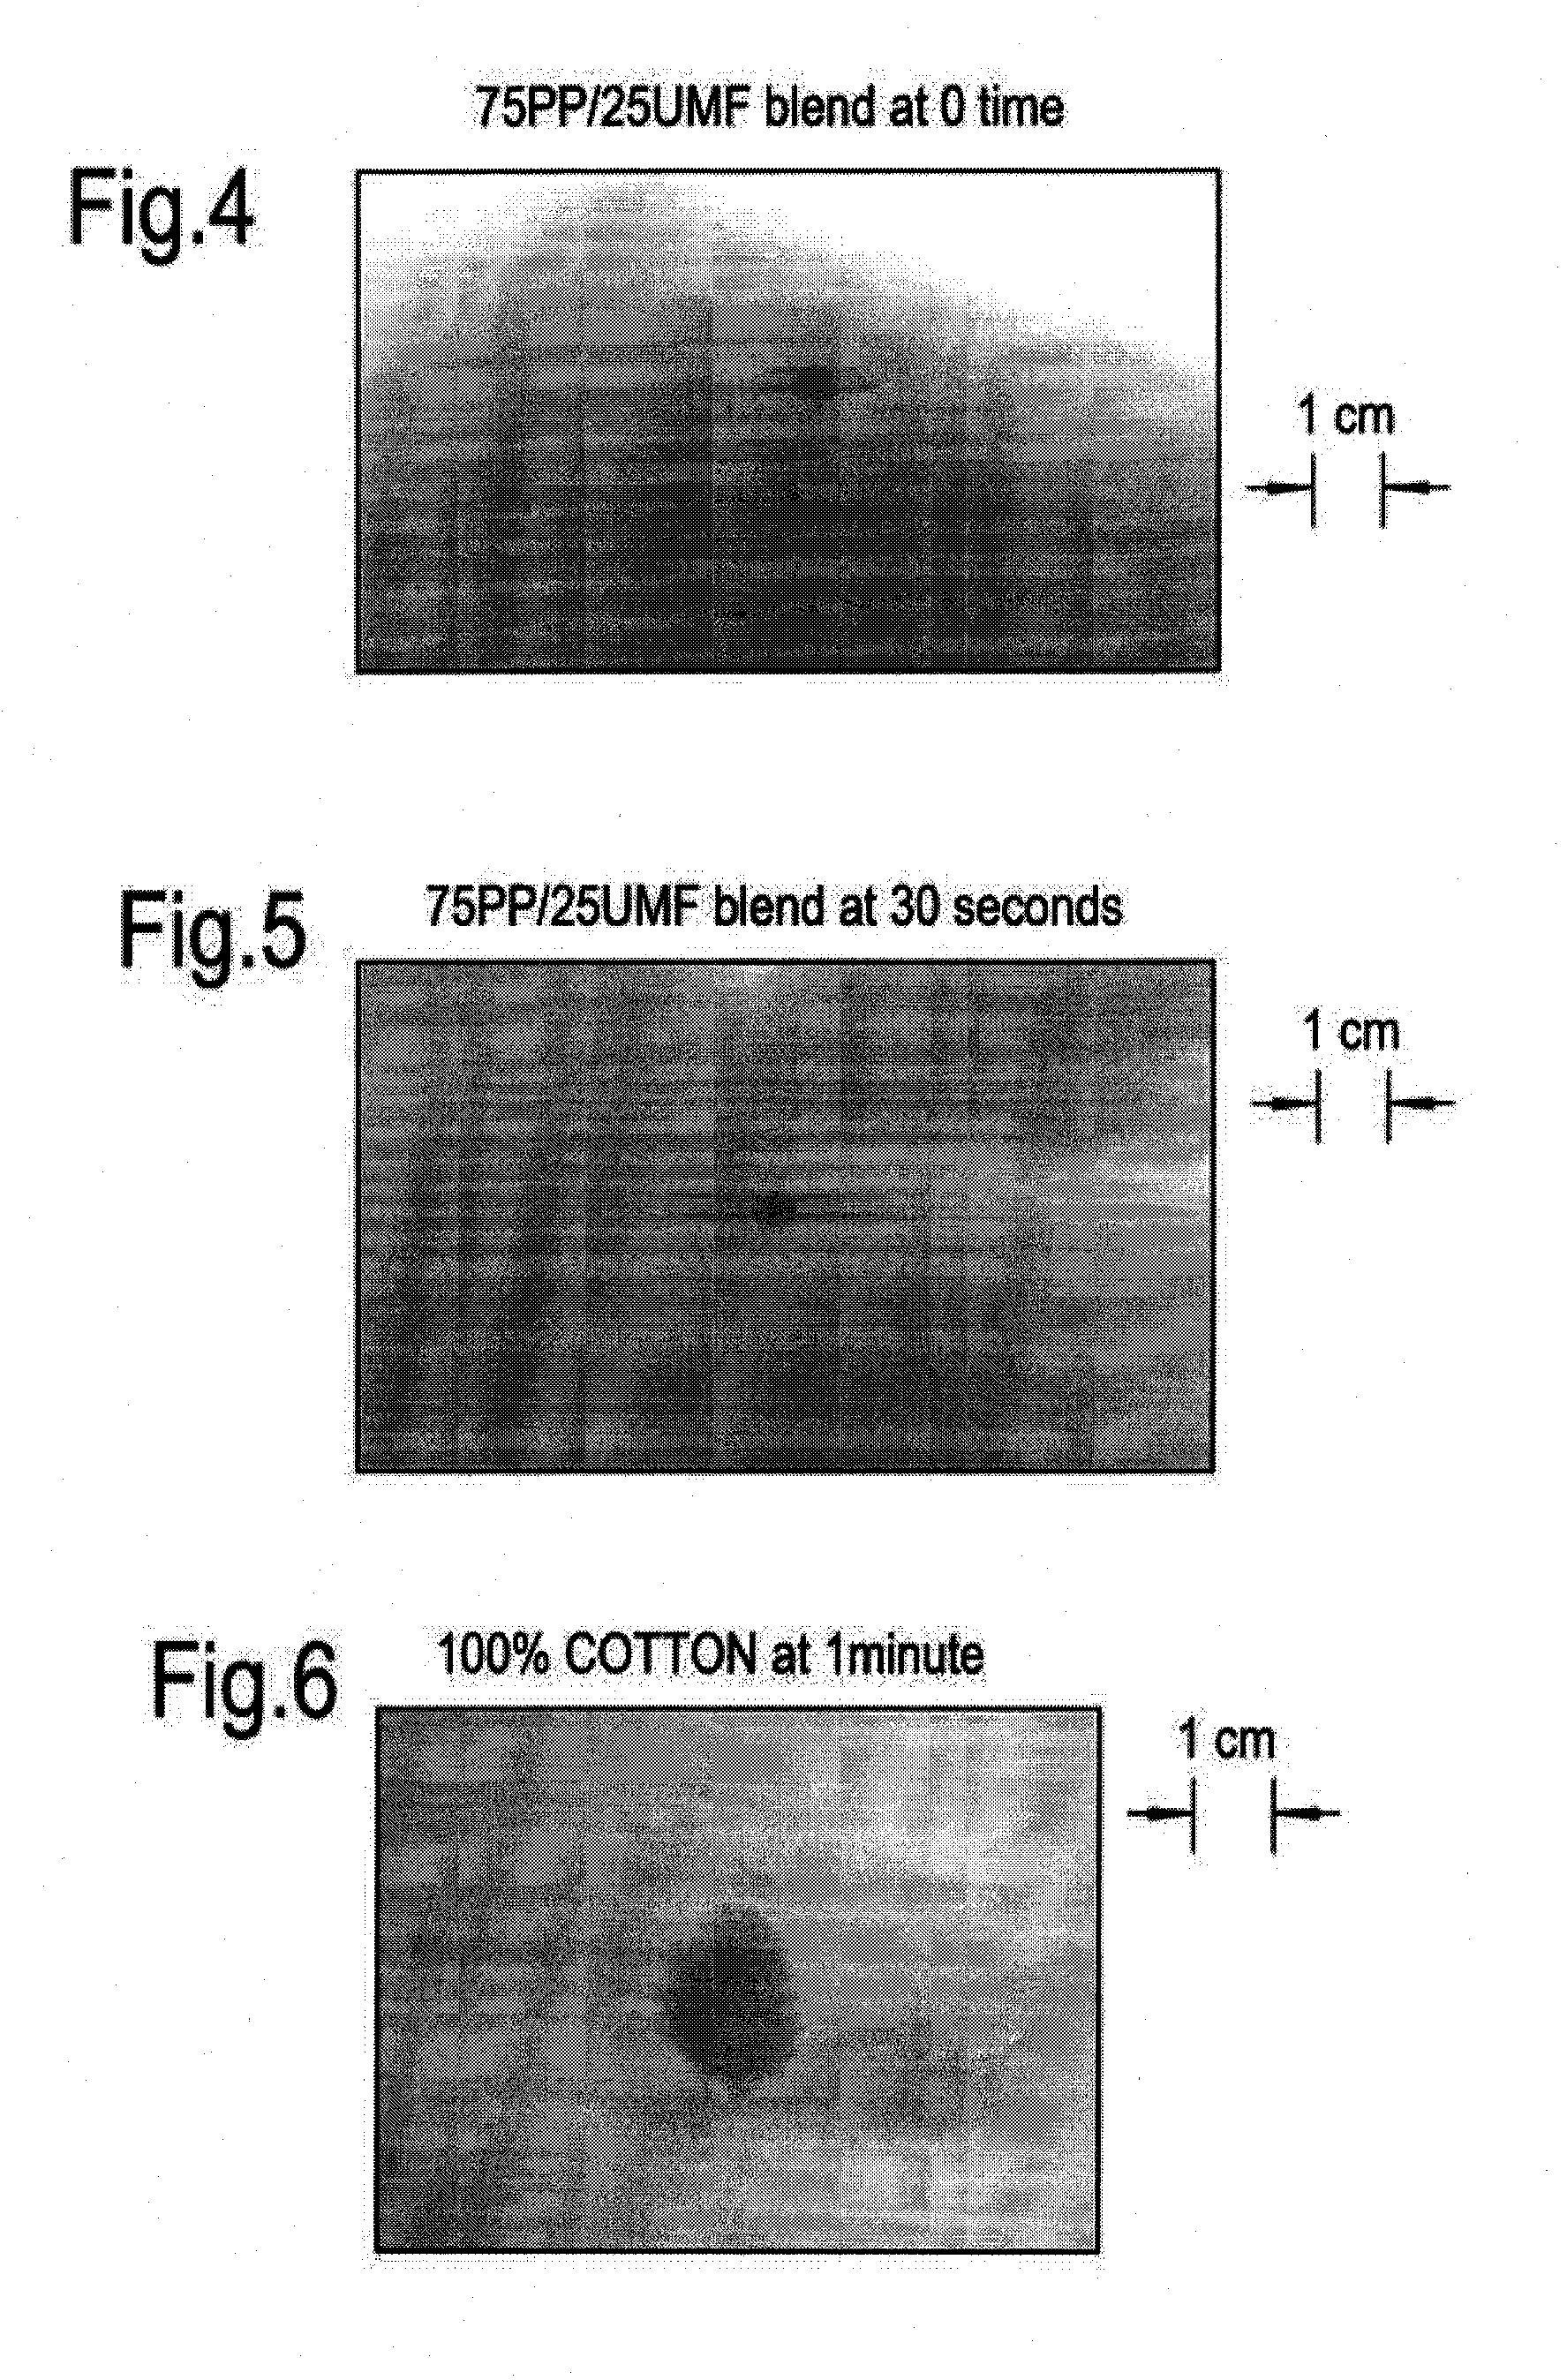 A multi-component combination yarn system for moisture management in textiles and system for producing same